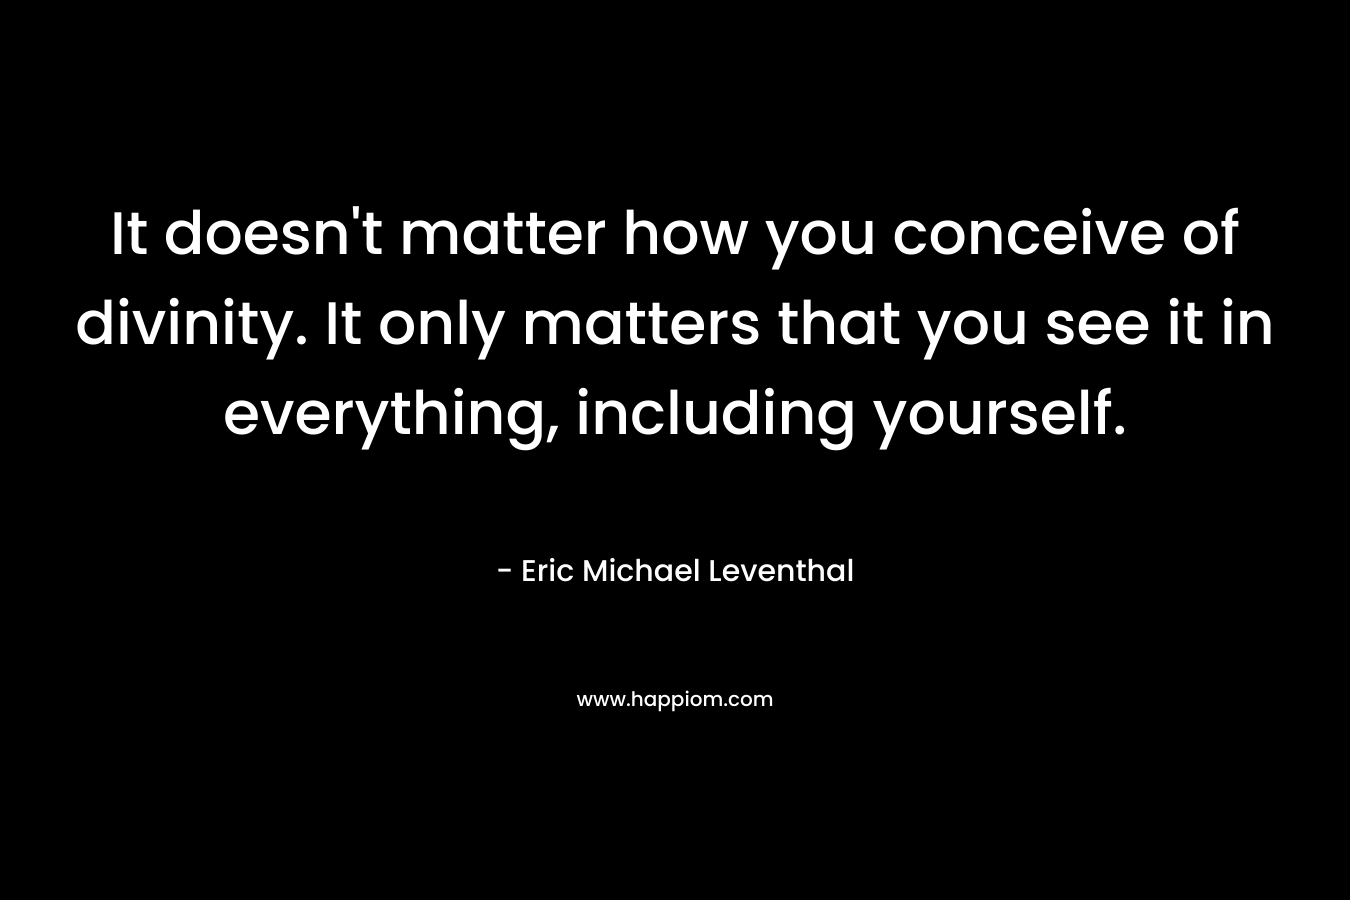 It doesn't matter how you conceive of divinity. It only matters that you see it in everything, including yourself.